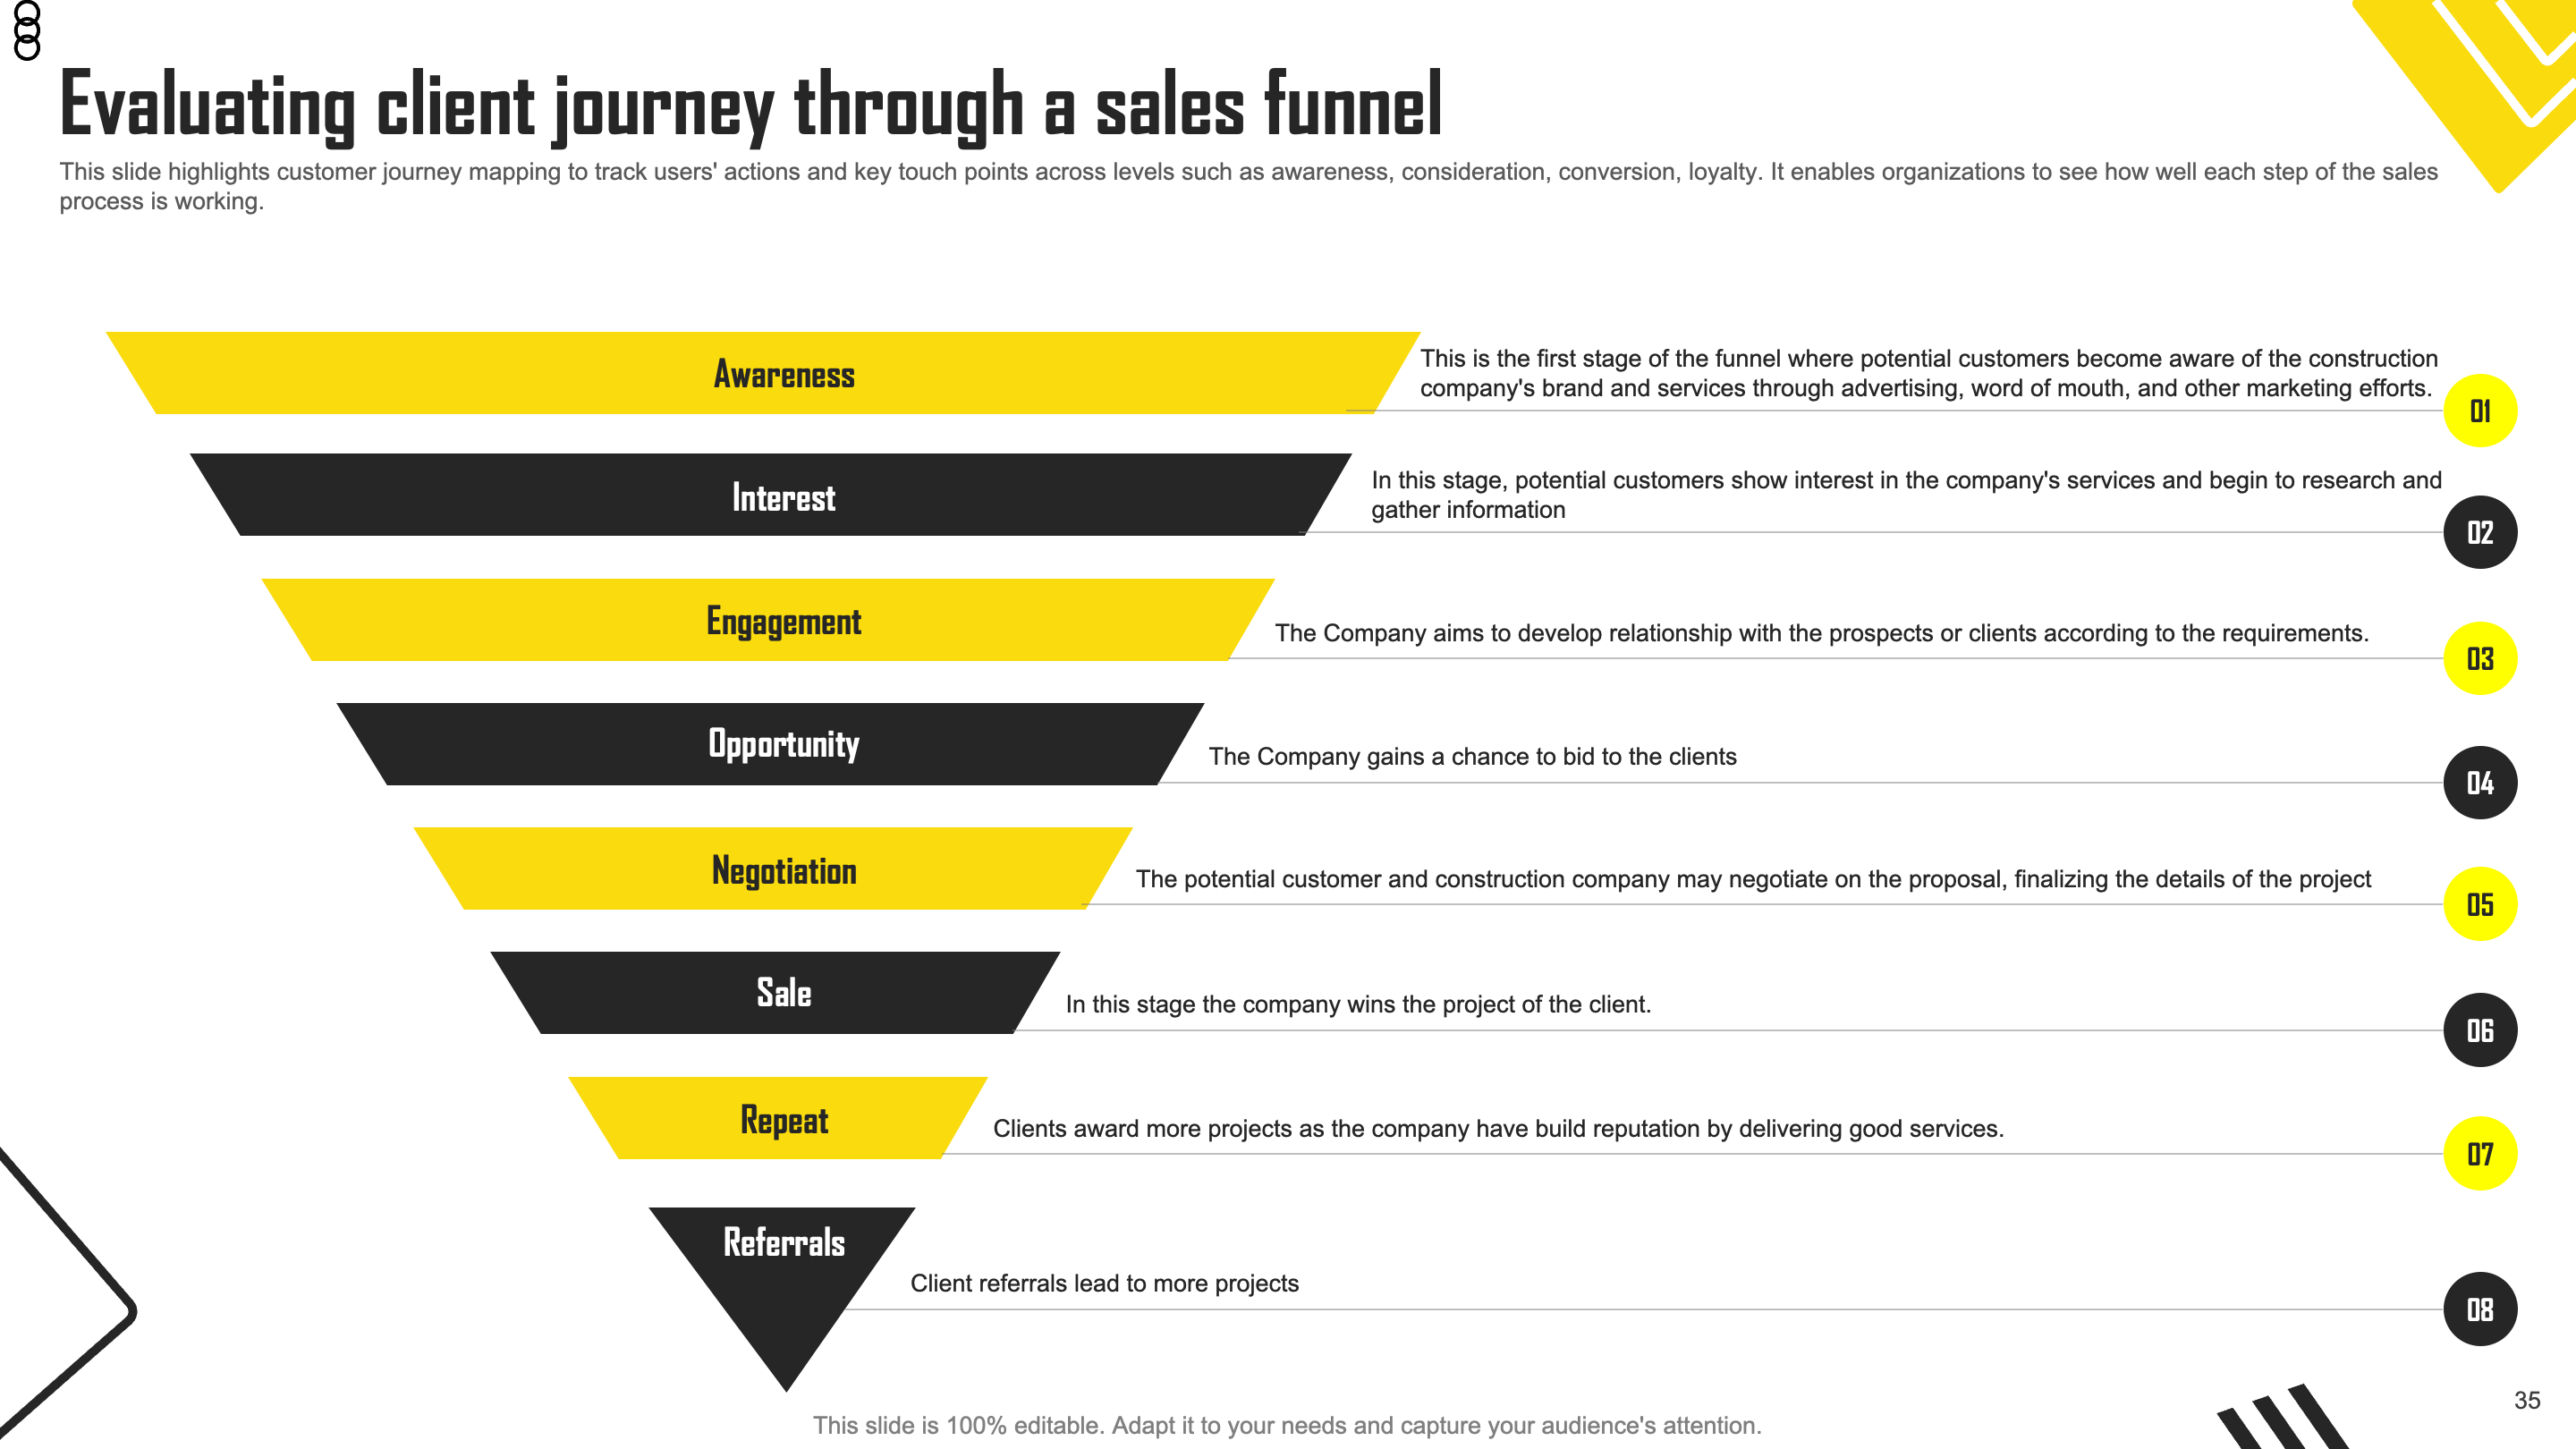 Evaluating client journey through a sales funnel